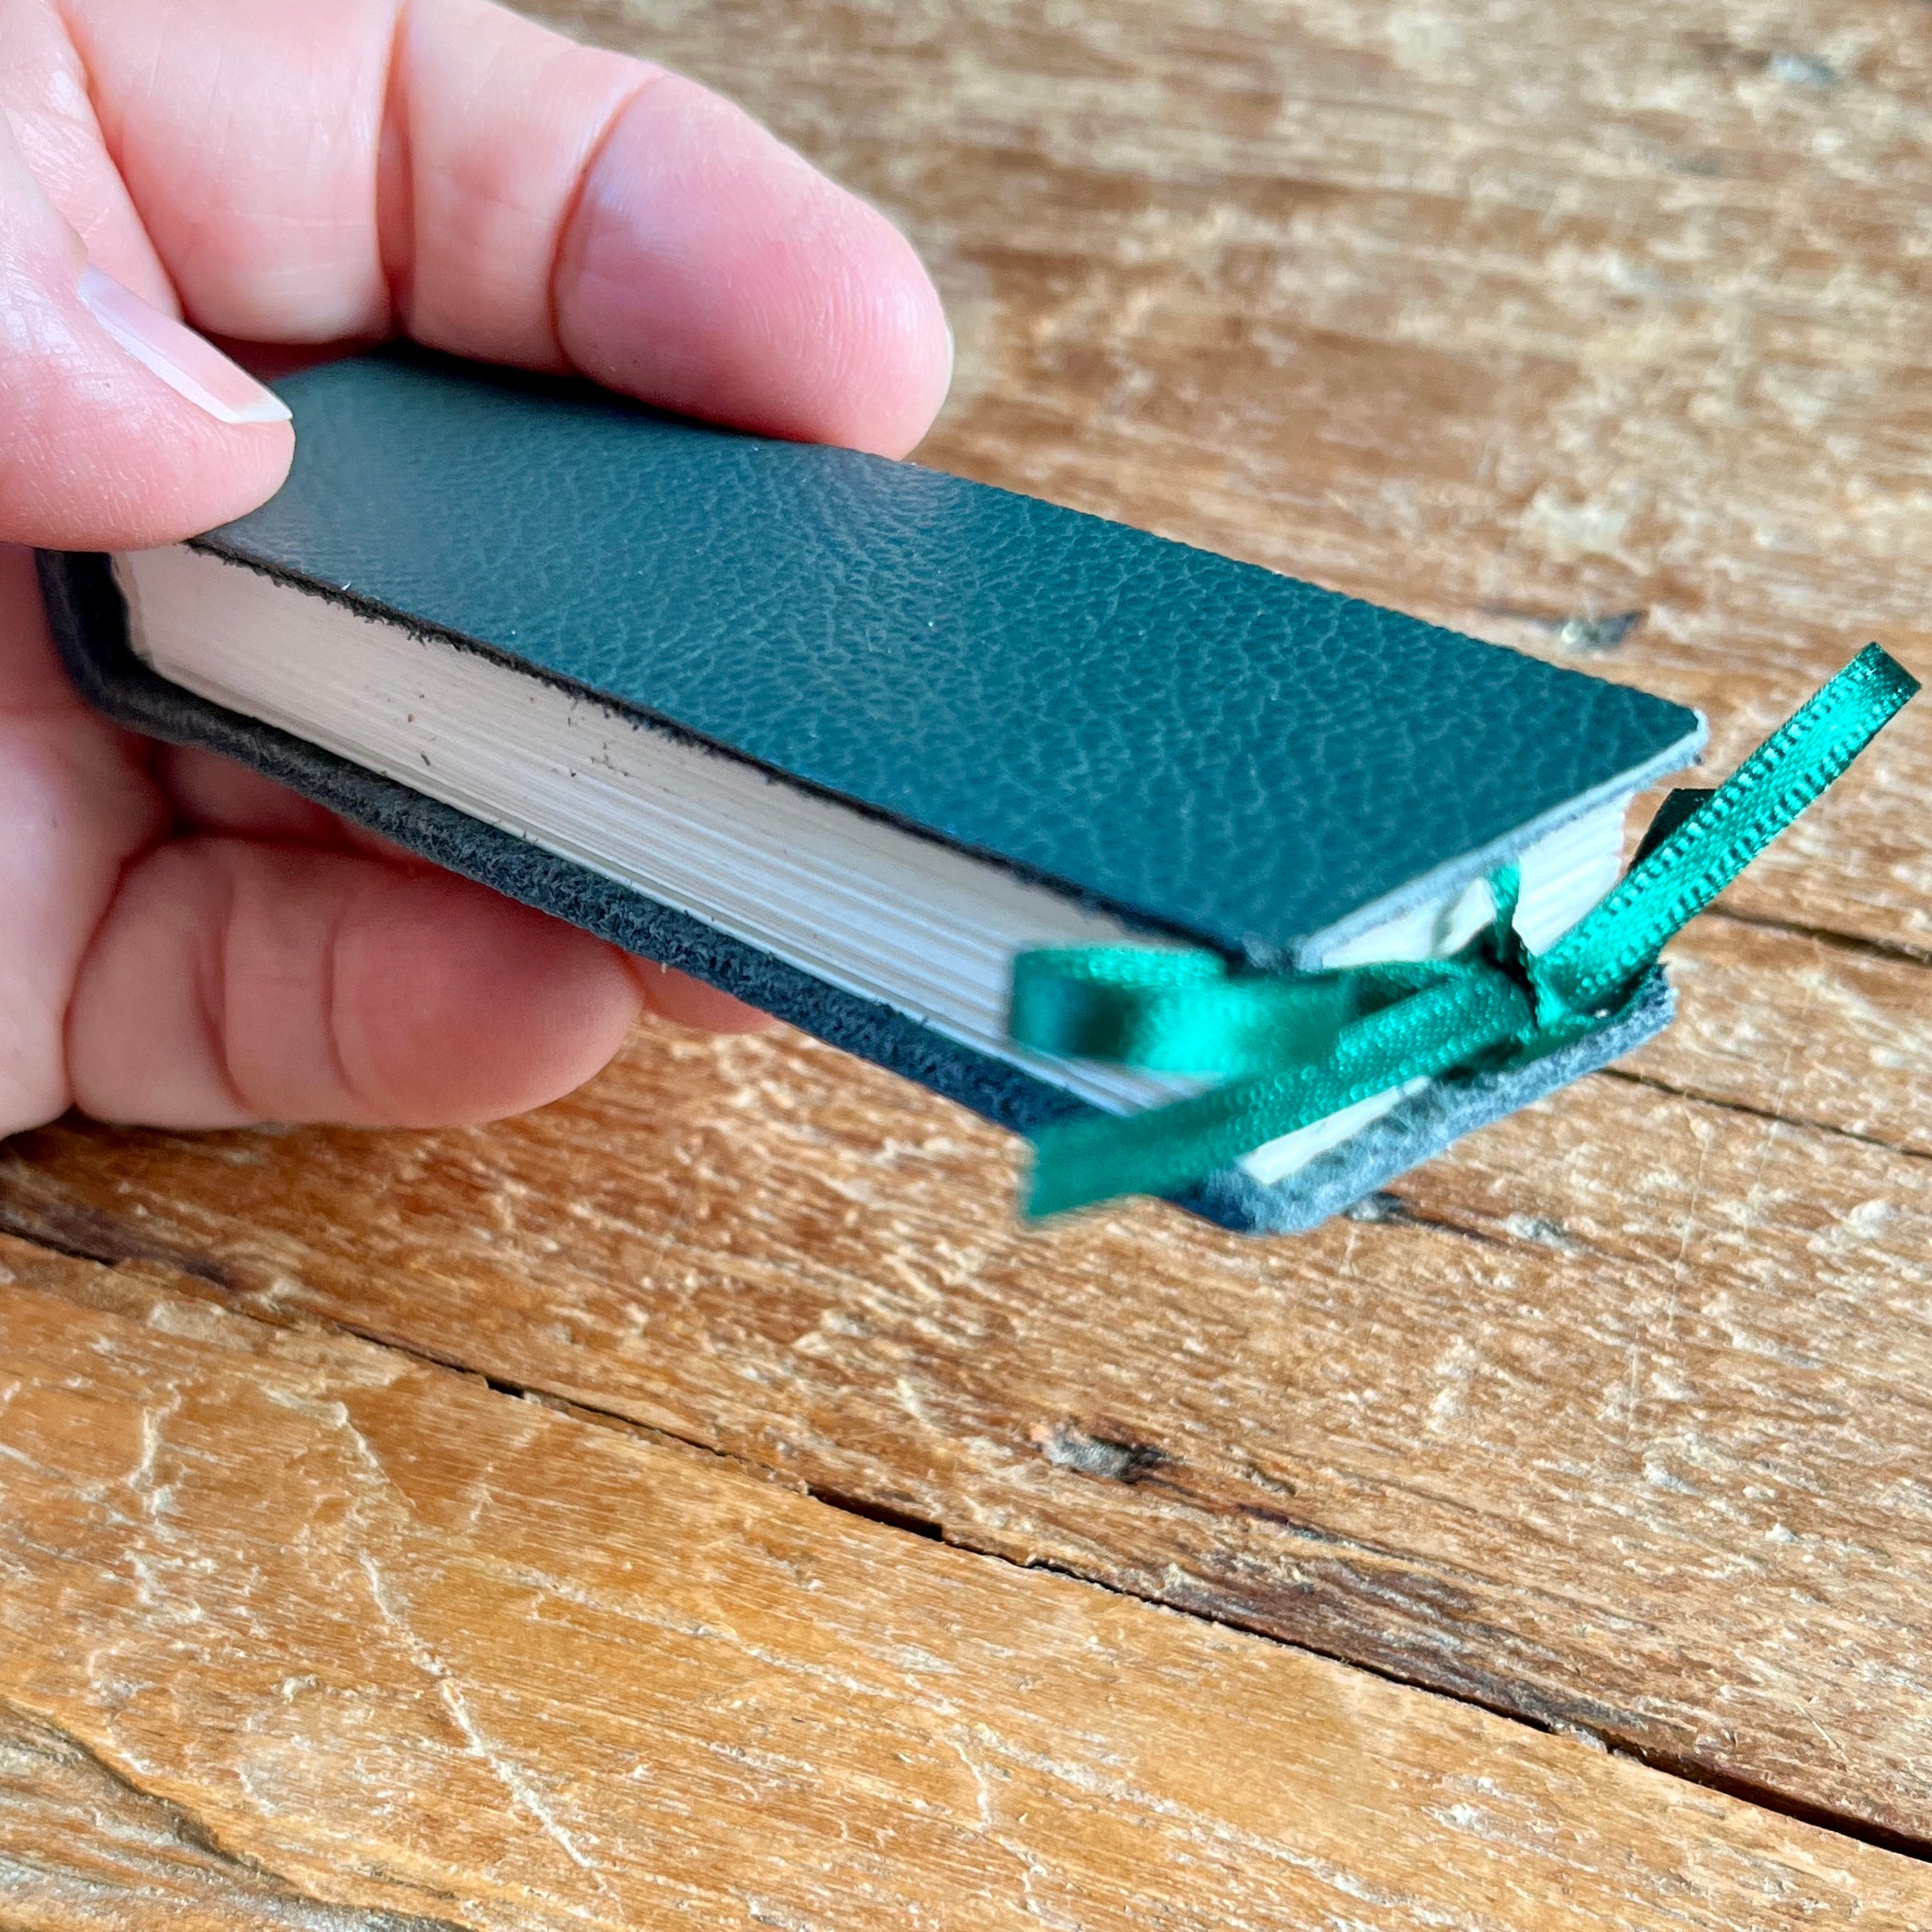 Slim handmade mini journal in green genuine leather - blank pages